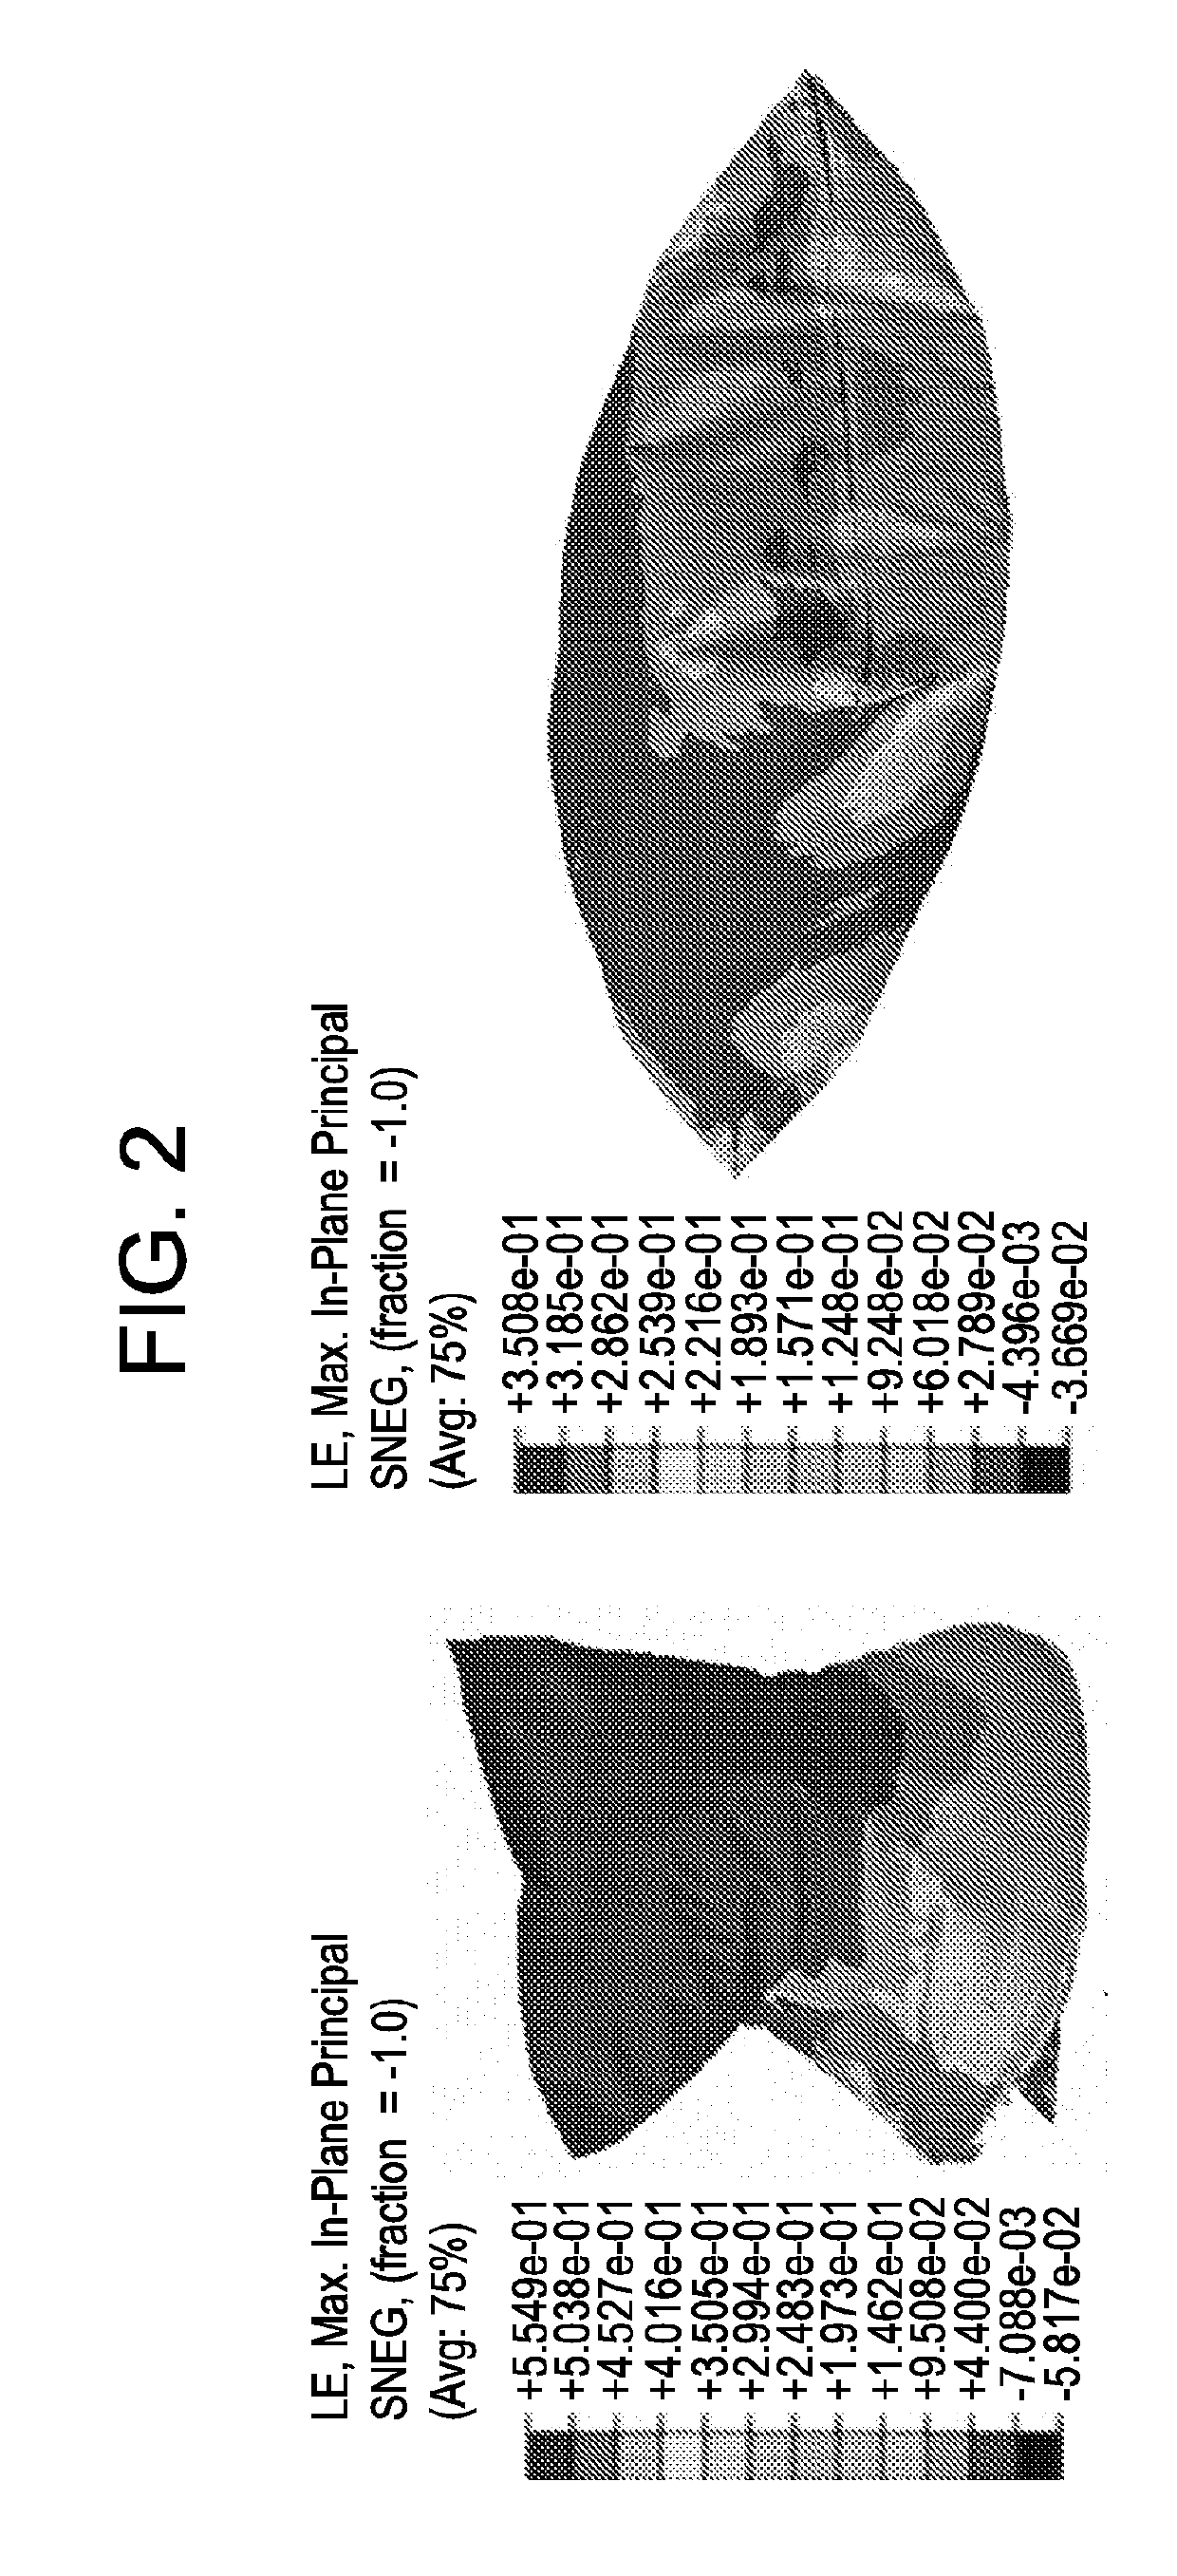 Methods for selecting film structures for packages